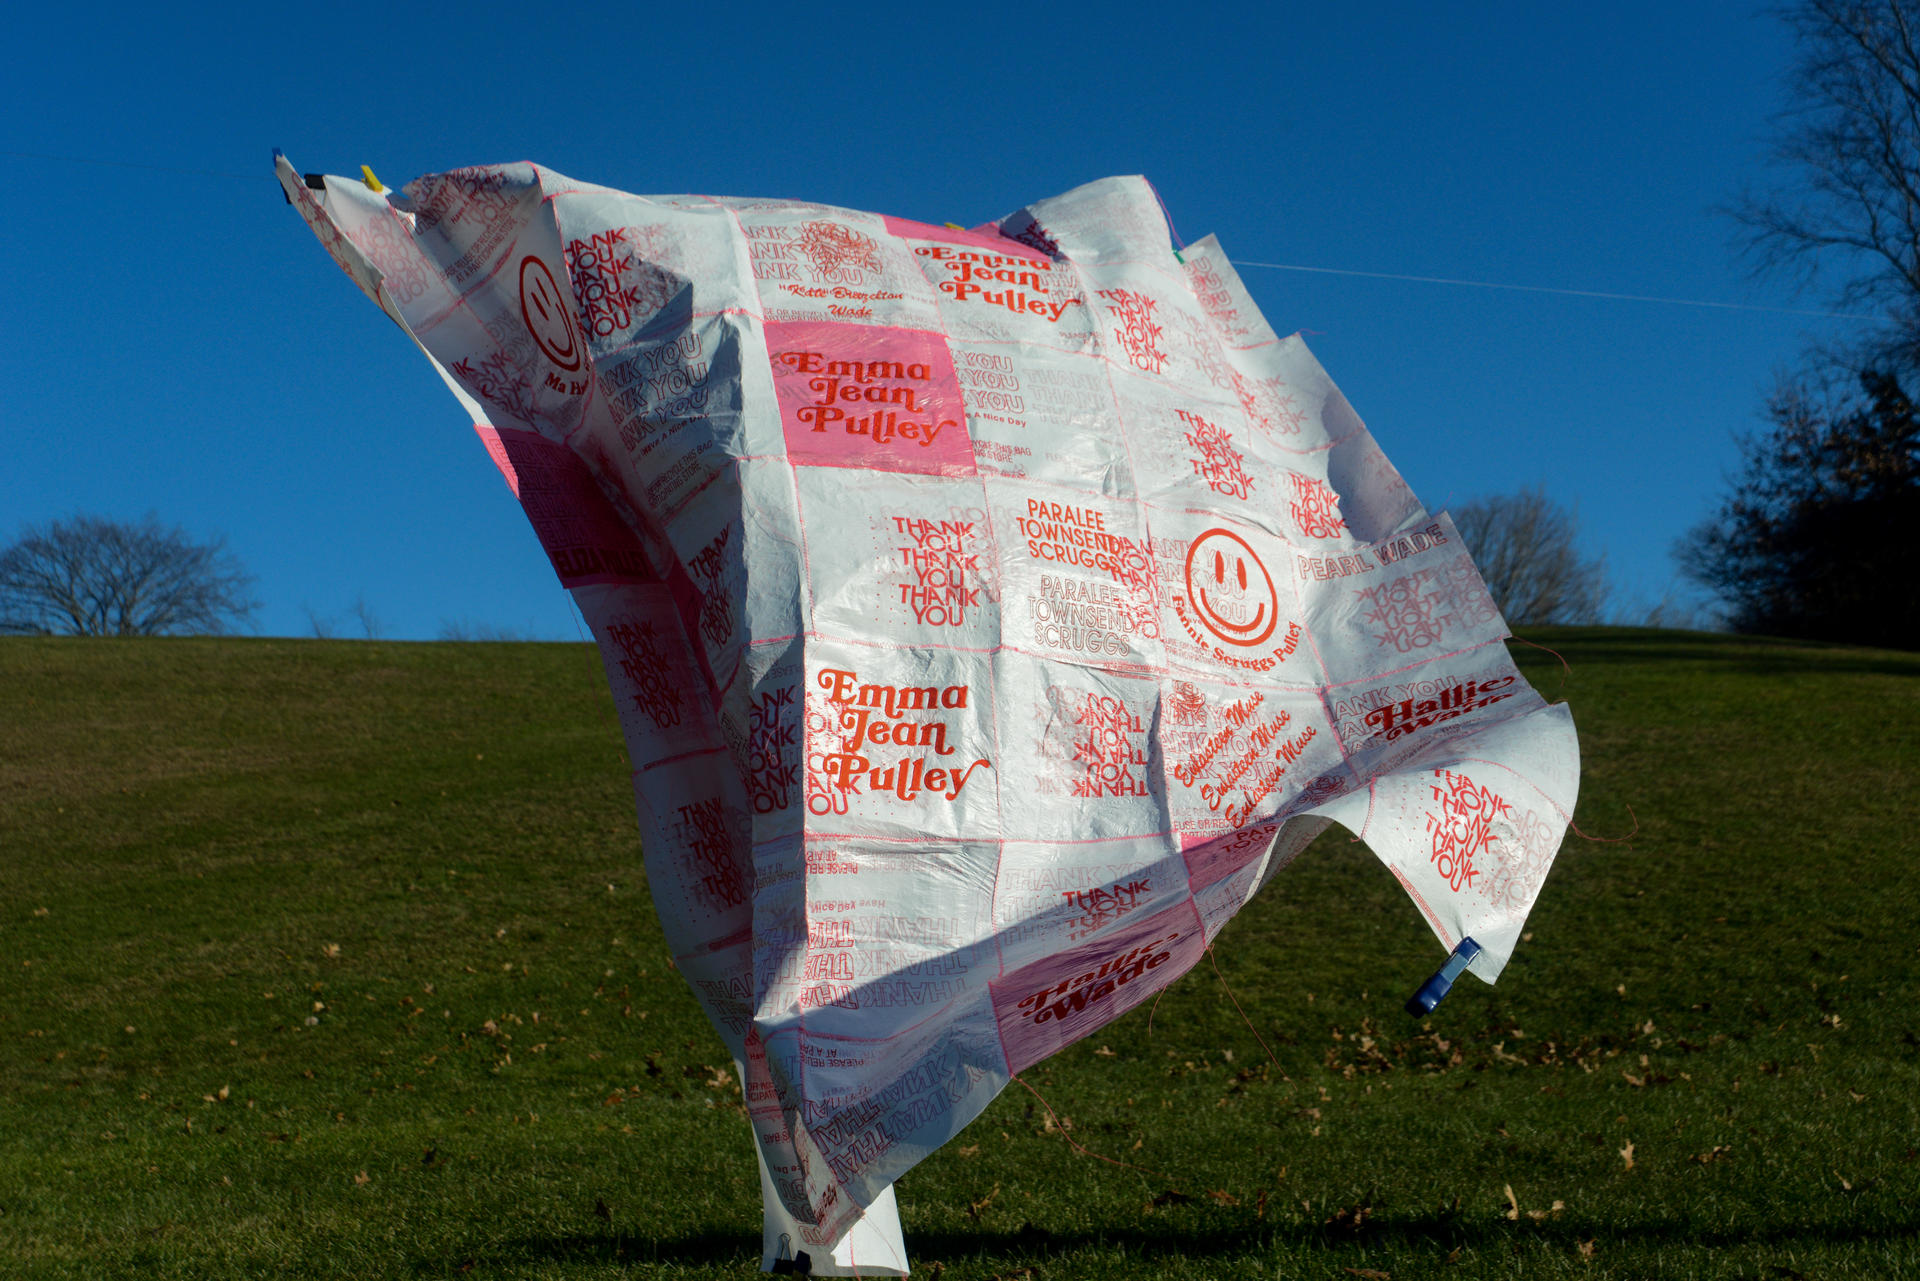 A white textile made of plastic bags with red-colored graphics.